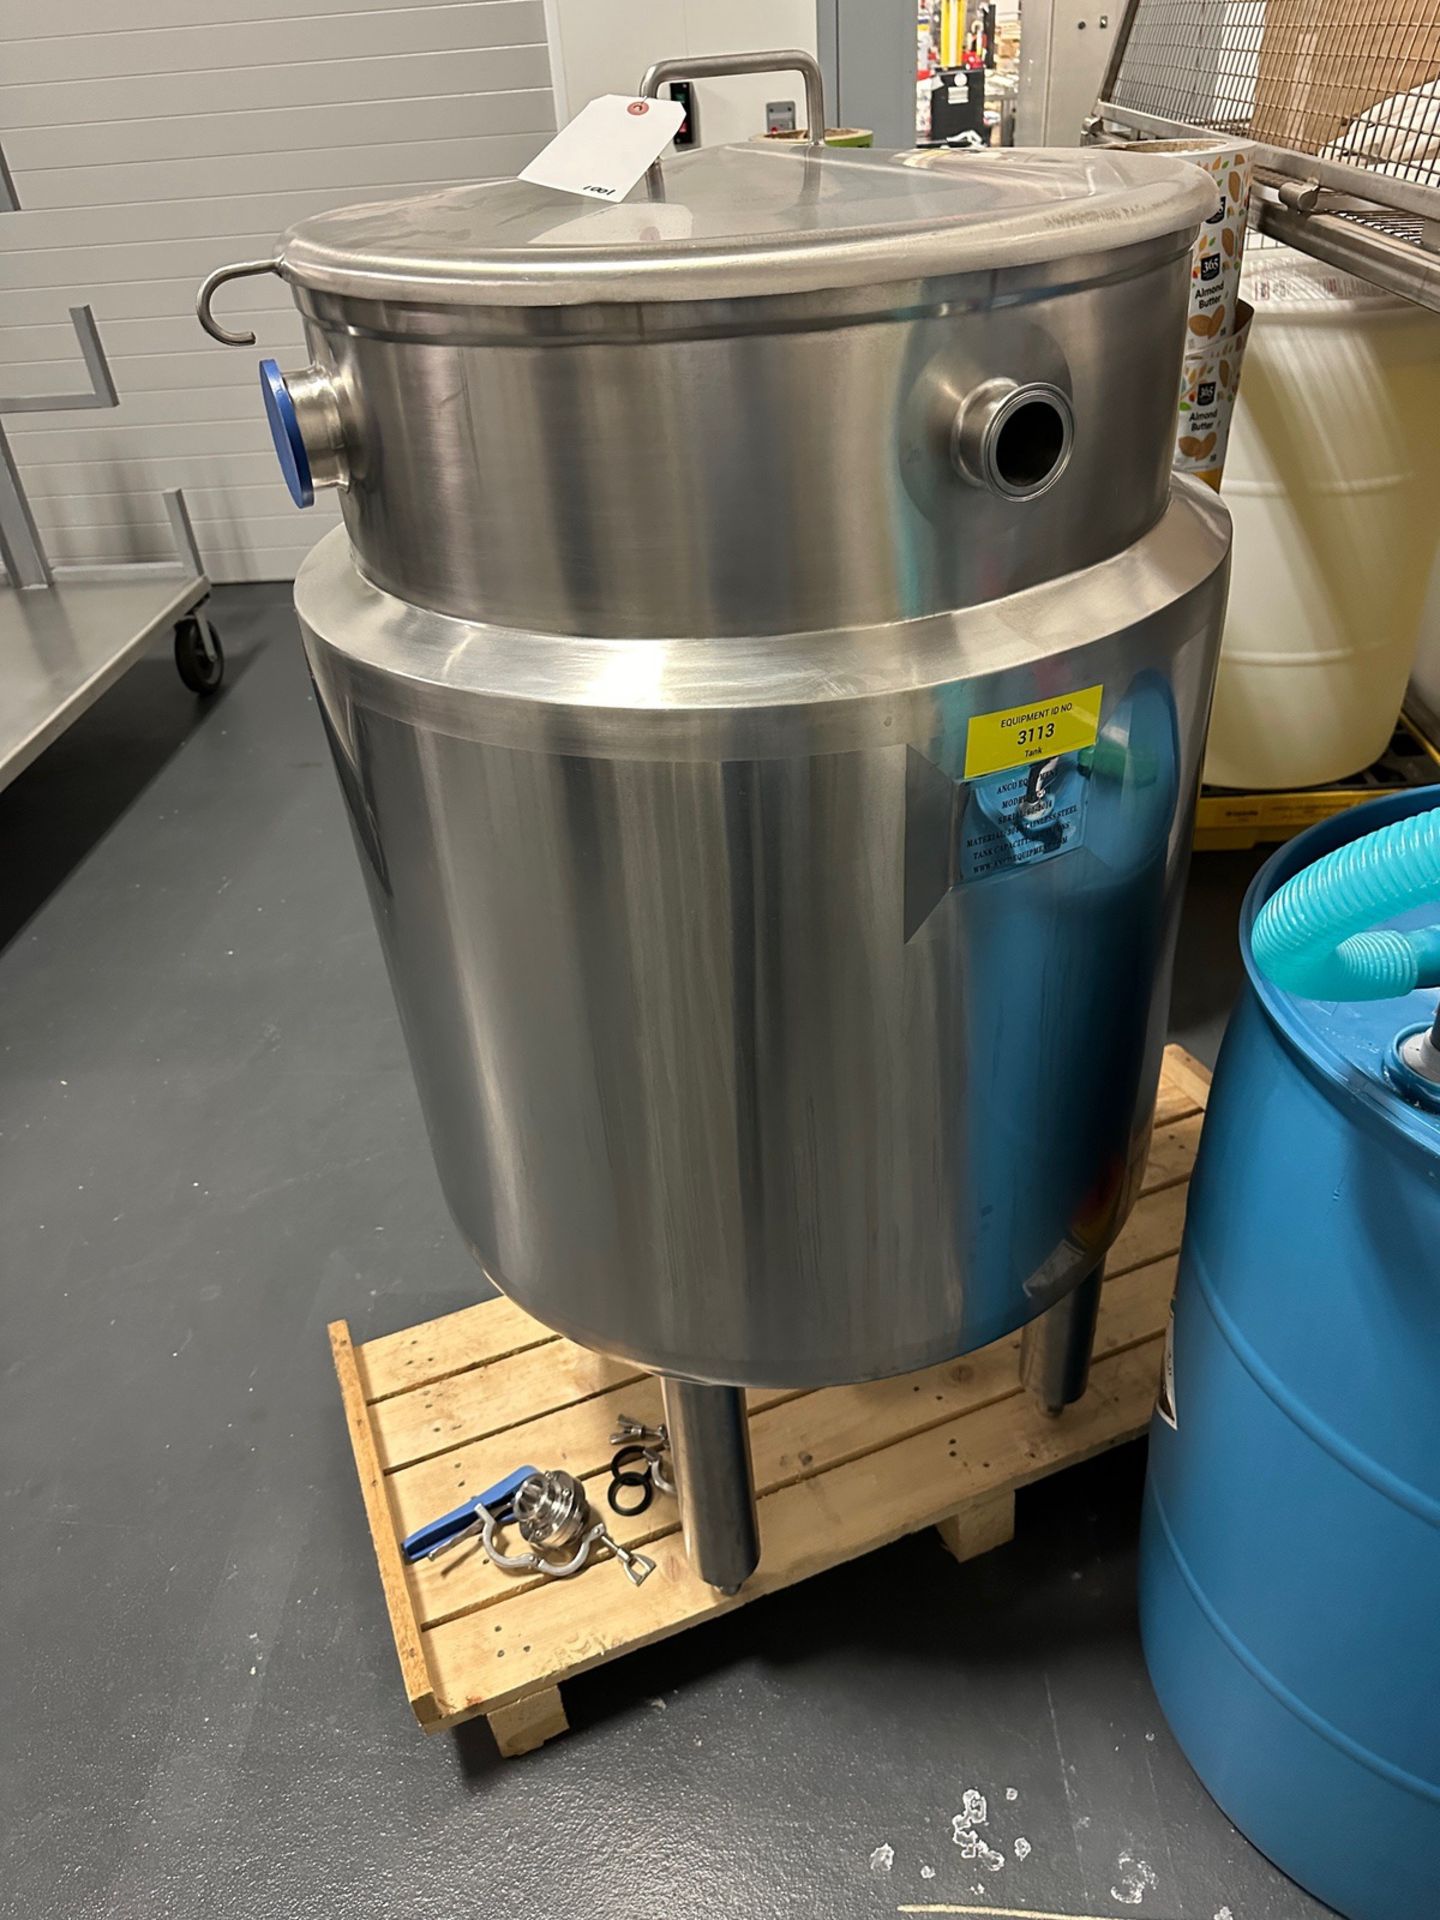 Anco 60 Gallon Stainless Steel Utility Tank - Model PT-OT, S/N 60-2014 (Approx. 30" | Rig Fee $100